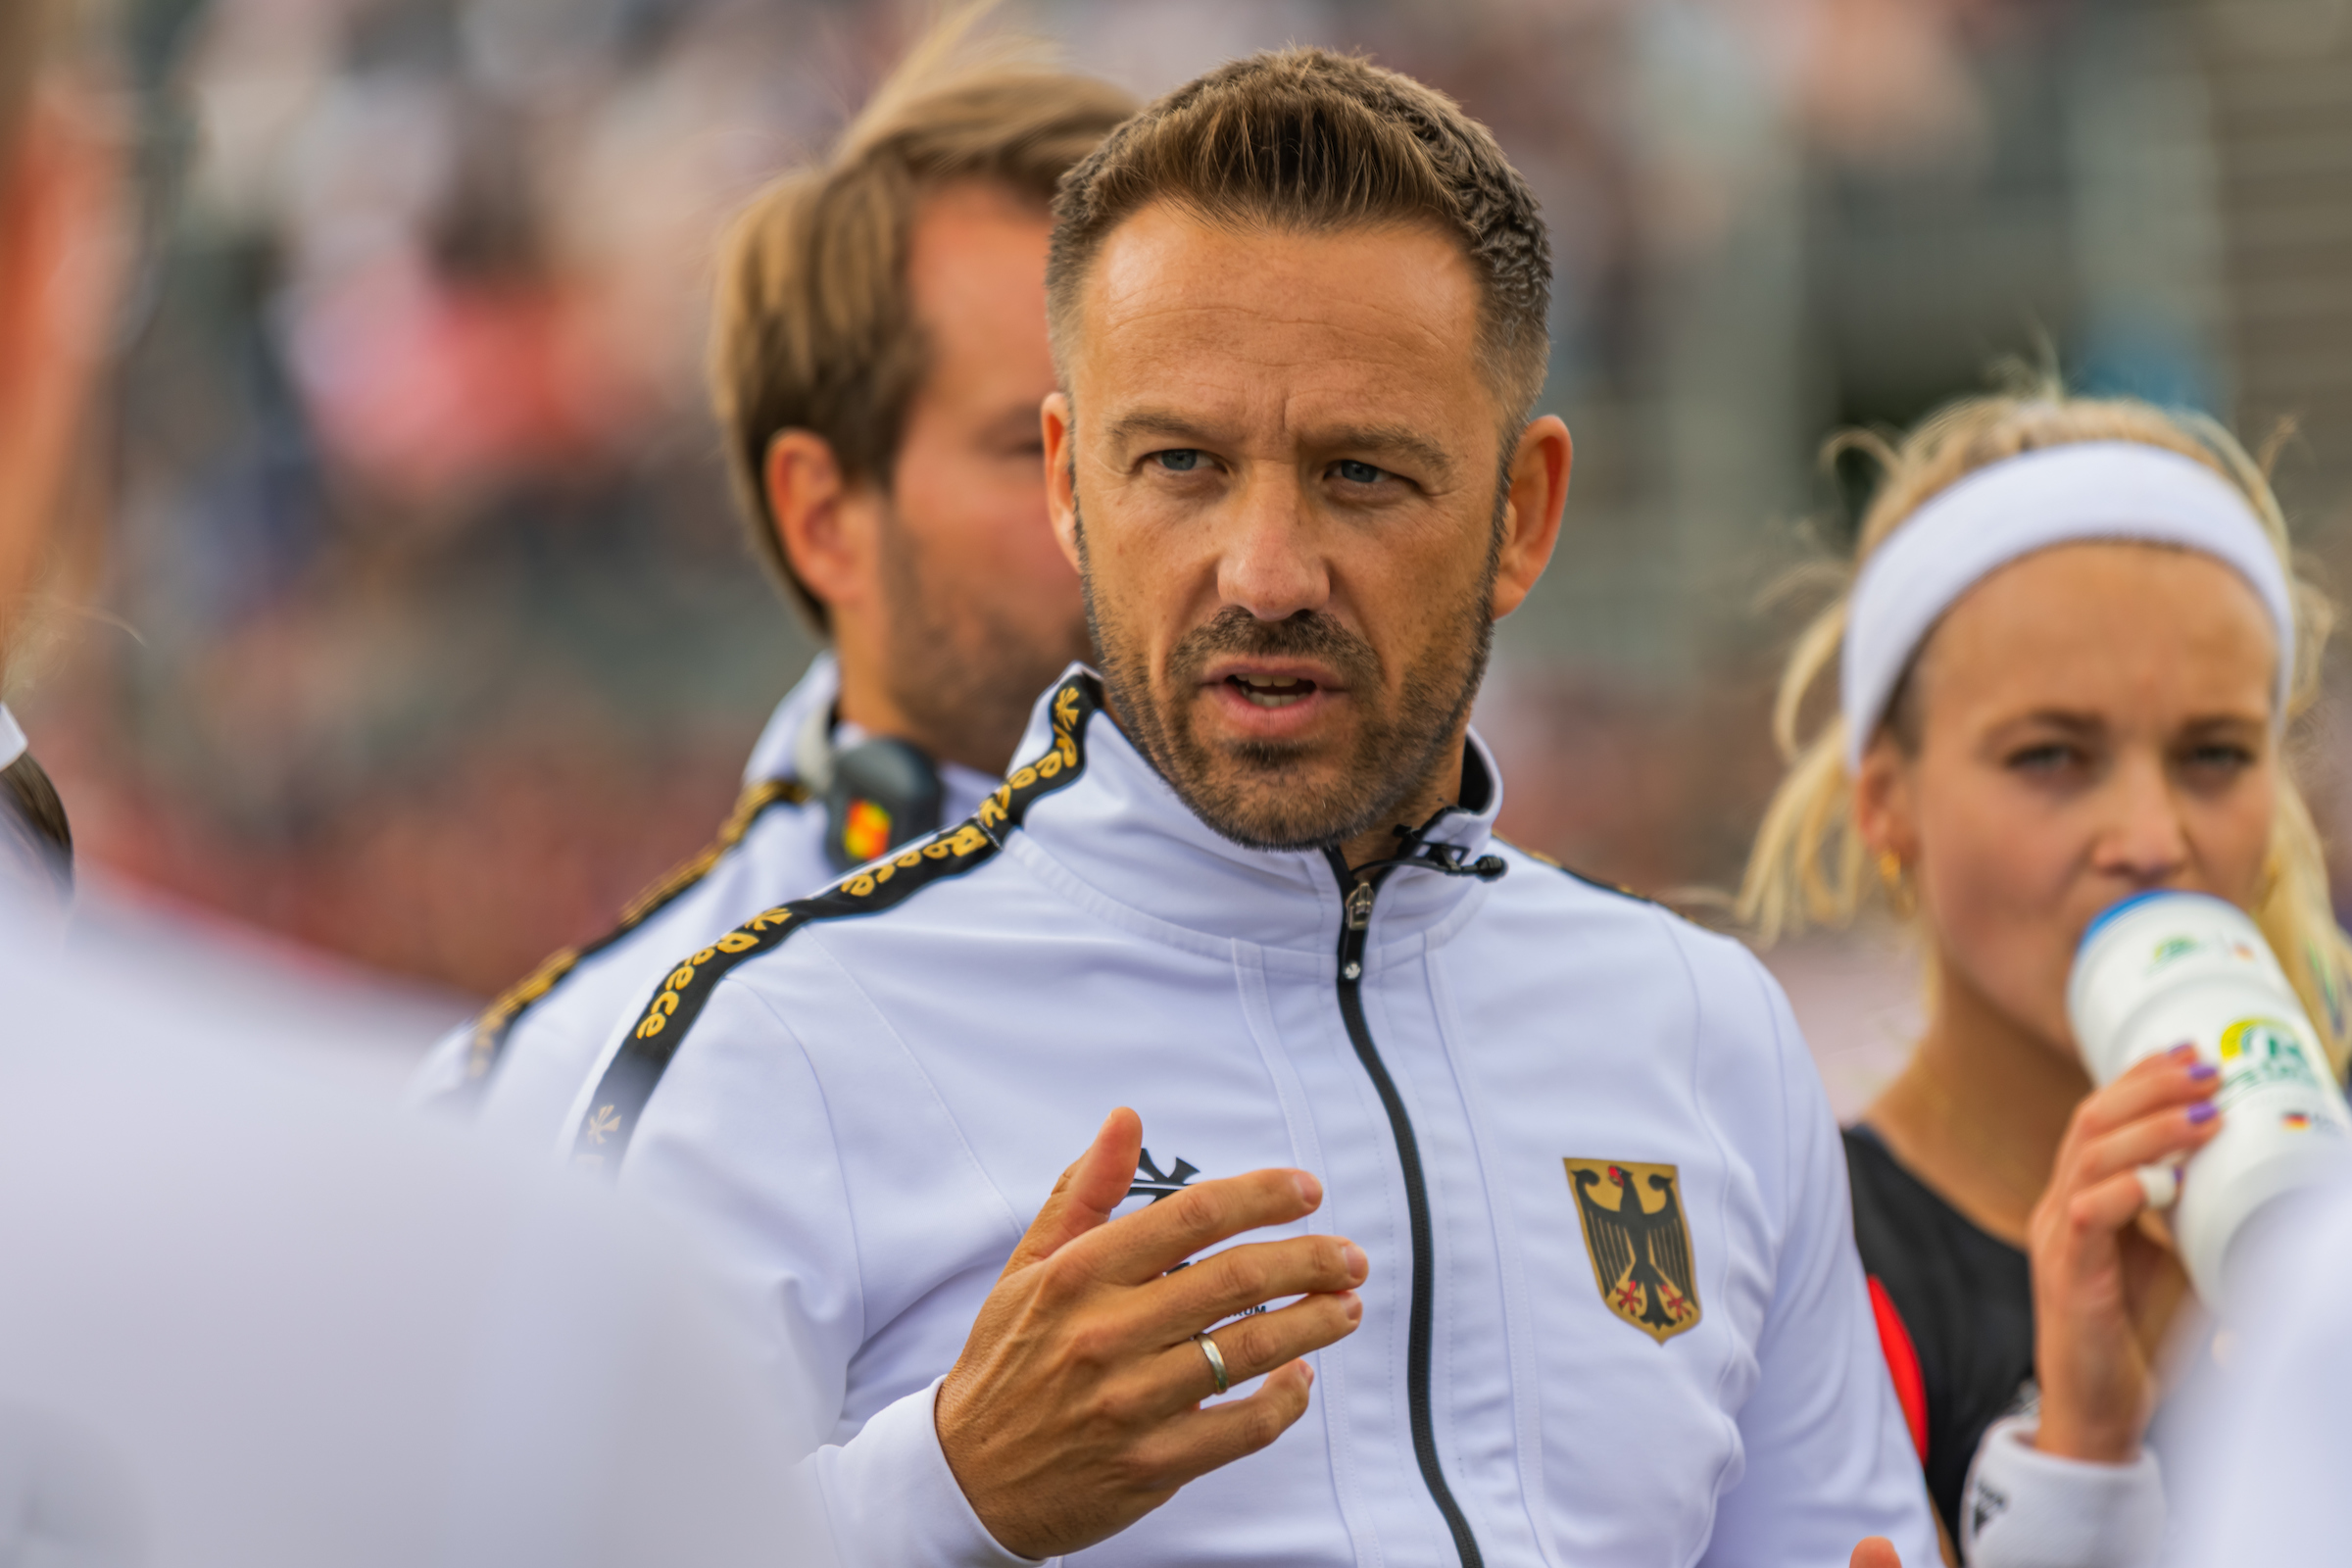 SM 20220611 D85 3786 - Germany: Valentin Altenburg Names His Danas World Cup Squad - The squad stands! 18 players will line up for the Danas at the Hockey World Championships in the Netherlands and Spain, which begin on July 1st. Our captains Sonja Zimmermann and Nike Lorenz lead the squad. In addition to the two leading players with Selin Oruz, Anne Schröder, Charlotte Stapenhorst and Cecile Pieper, national coach Valentin Altenburg also relies on a core of experienced players, all of whom have already gained a lot of tournament experience.